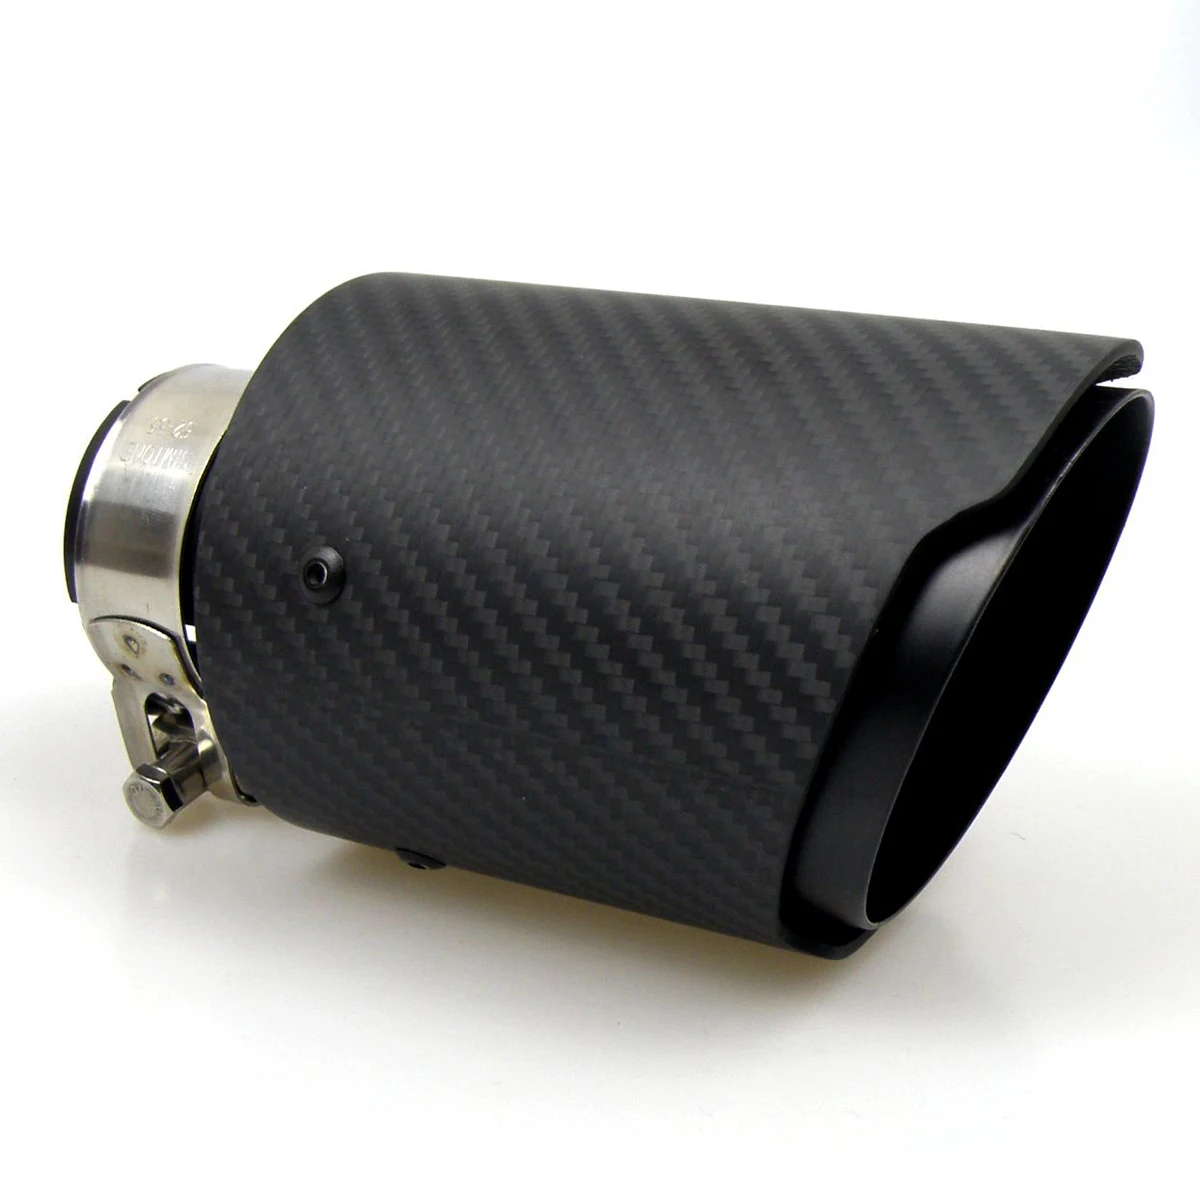 Matte Twill Carbon Fibre Car Exhaust Tip Black Coated Stainless Steel Muffler Tip Tail Pipe For BMW BENZ AUDI VW Car Accessories